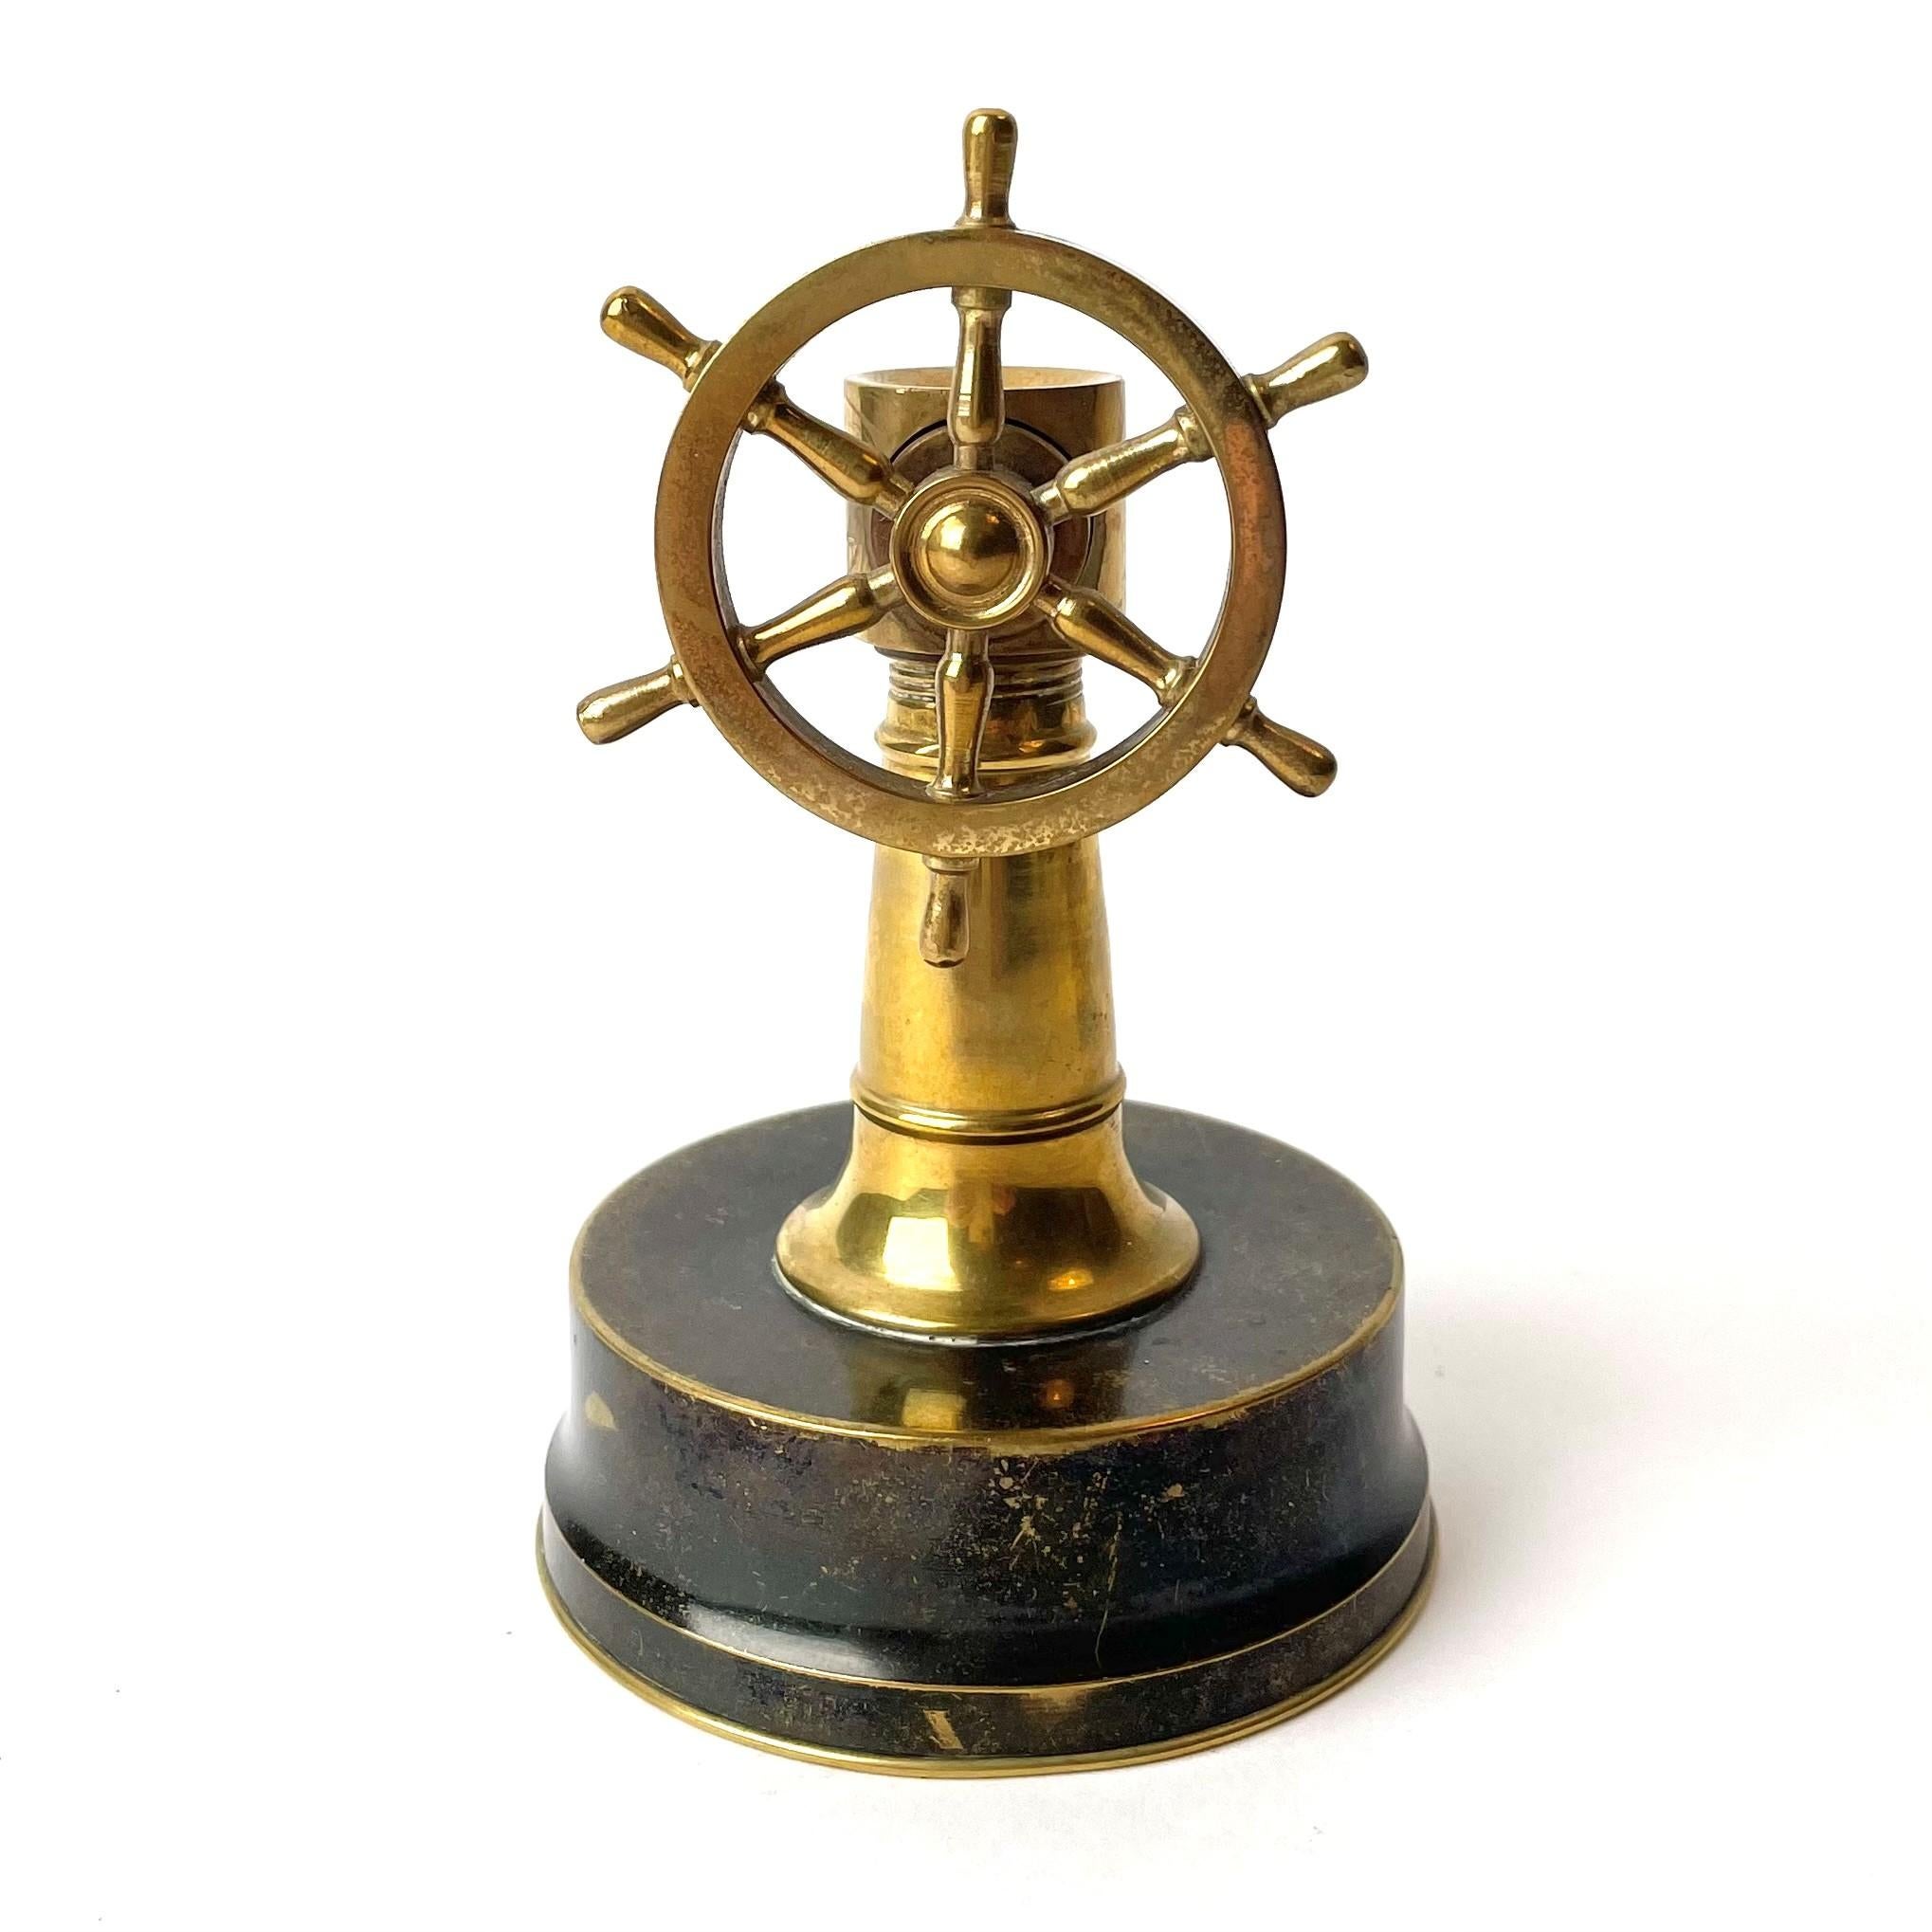 Rare cigar cutter in the shape of a ships wheel, Made in brass during the early 20th Century. Some patina but in good condition and works well.

Wear consistent with age and use.